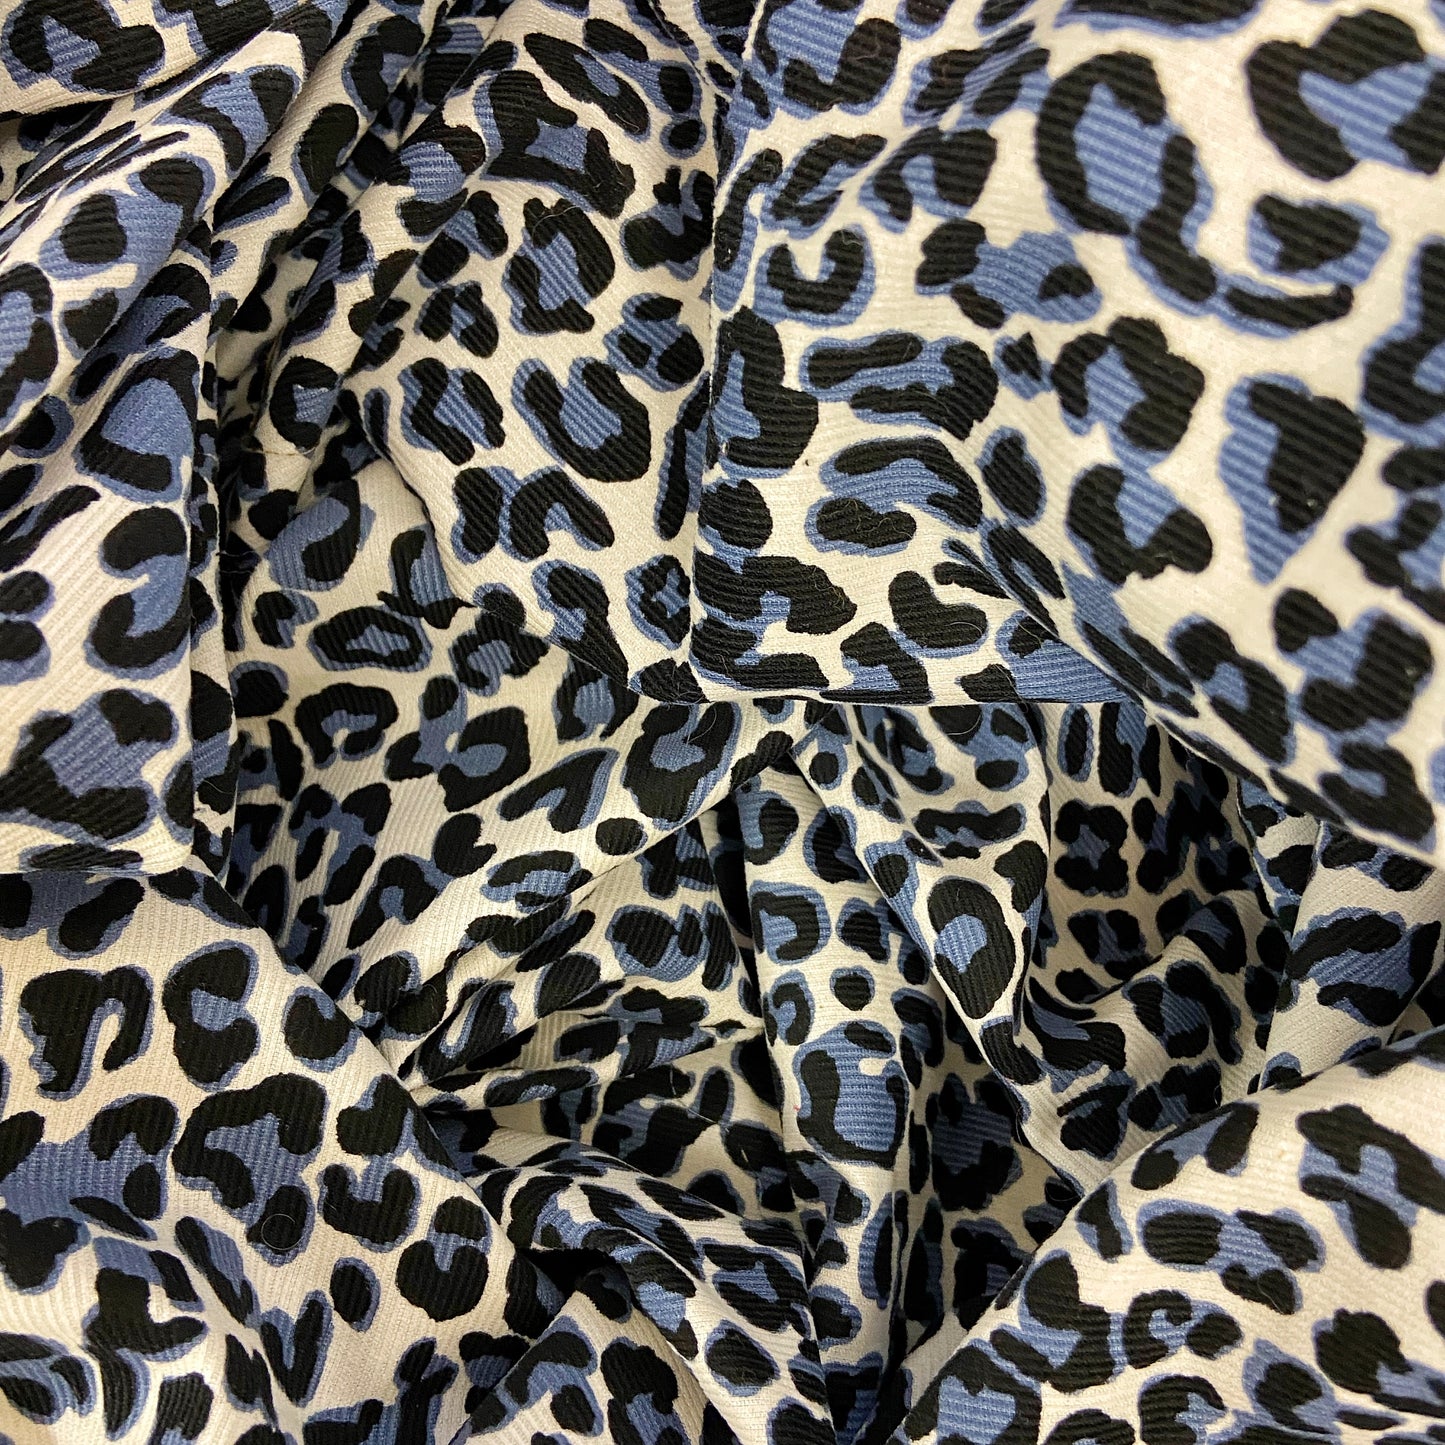 Leopard Print Needle Cord Fabric - Perfect for Bag Lining